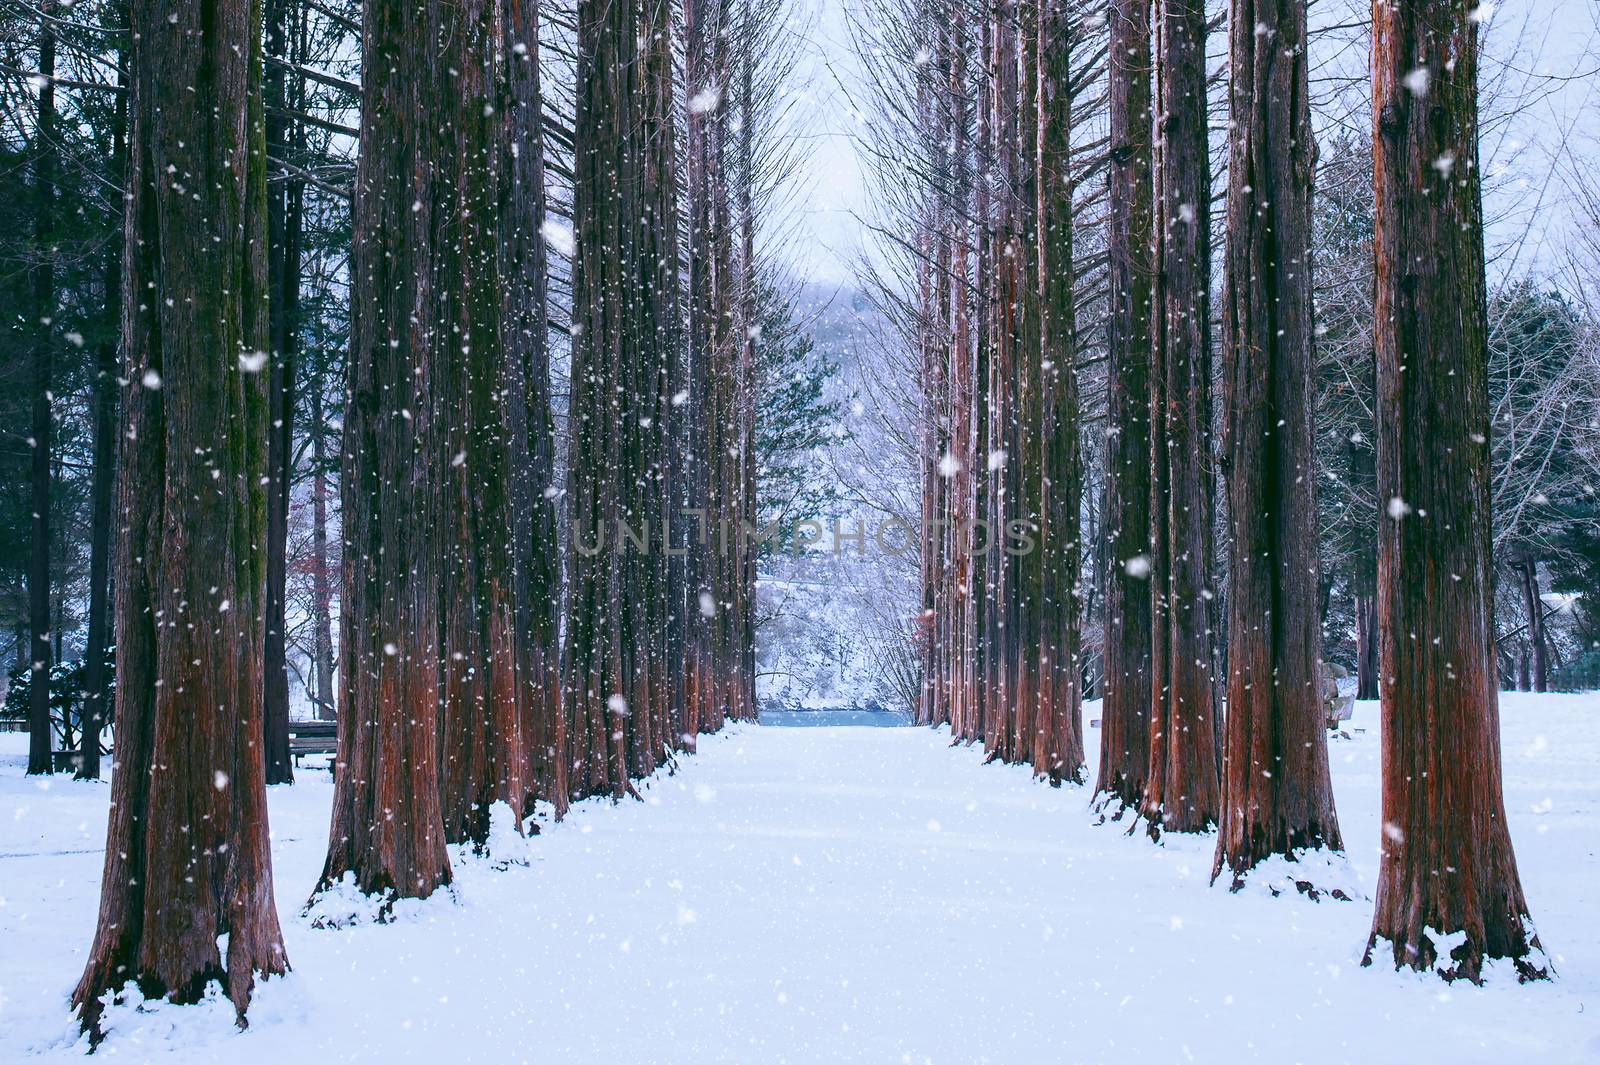 Nami island in Korea,Row of pine trees in winter. by gutarphotoghaphy